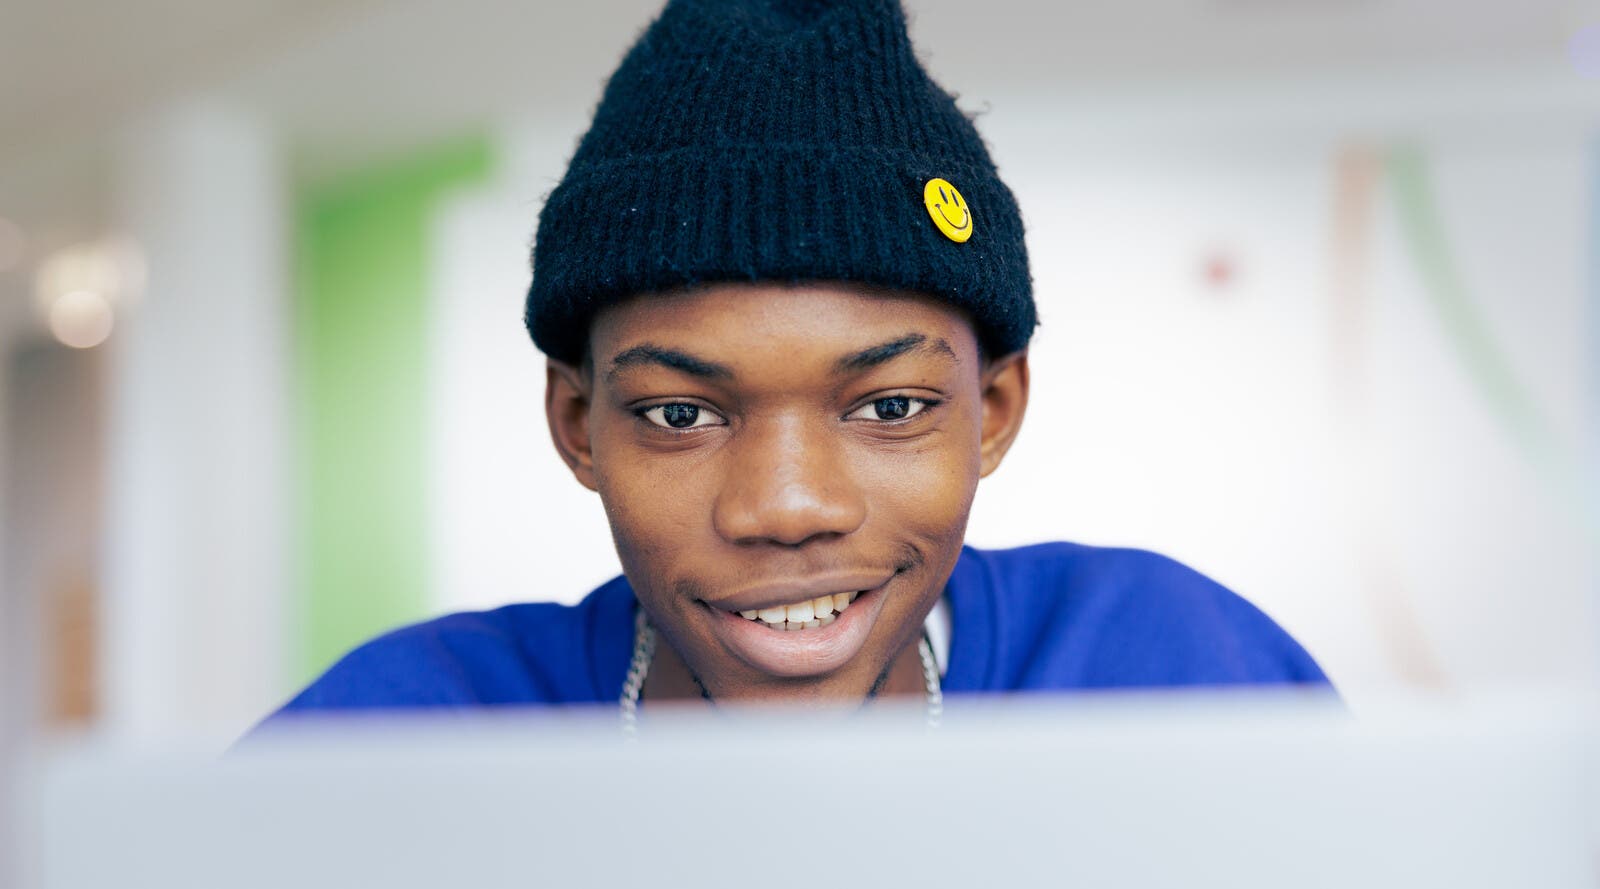 Student smiling and looking at laptop